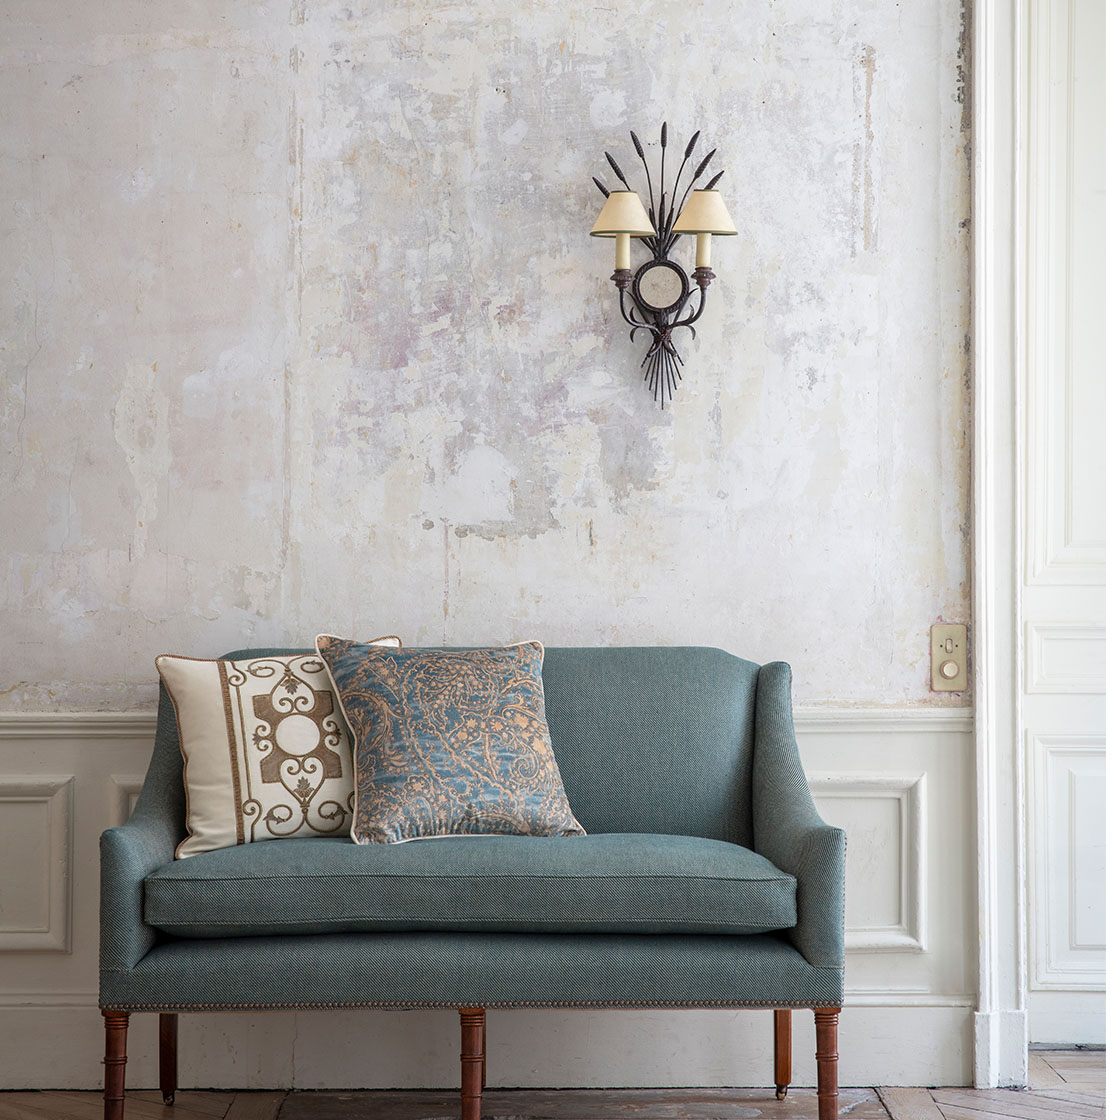 Devon light in Oxidised real silver with Alexandra sofa, Balthazar and Cordoba cushions - Beaumont & Fletcher